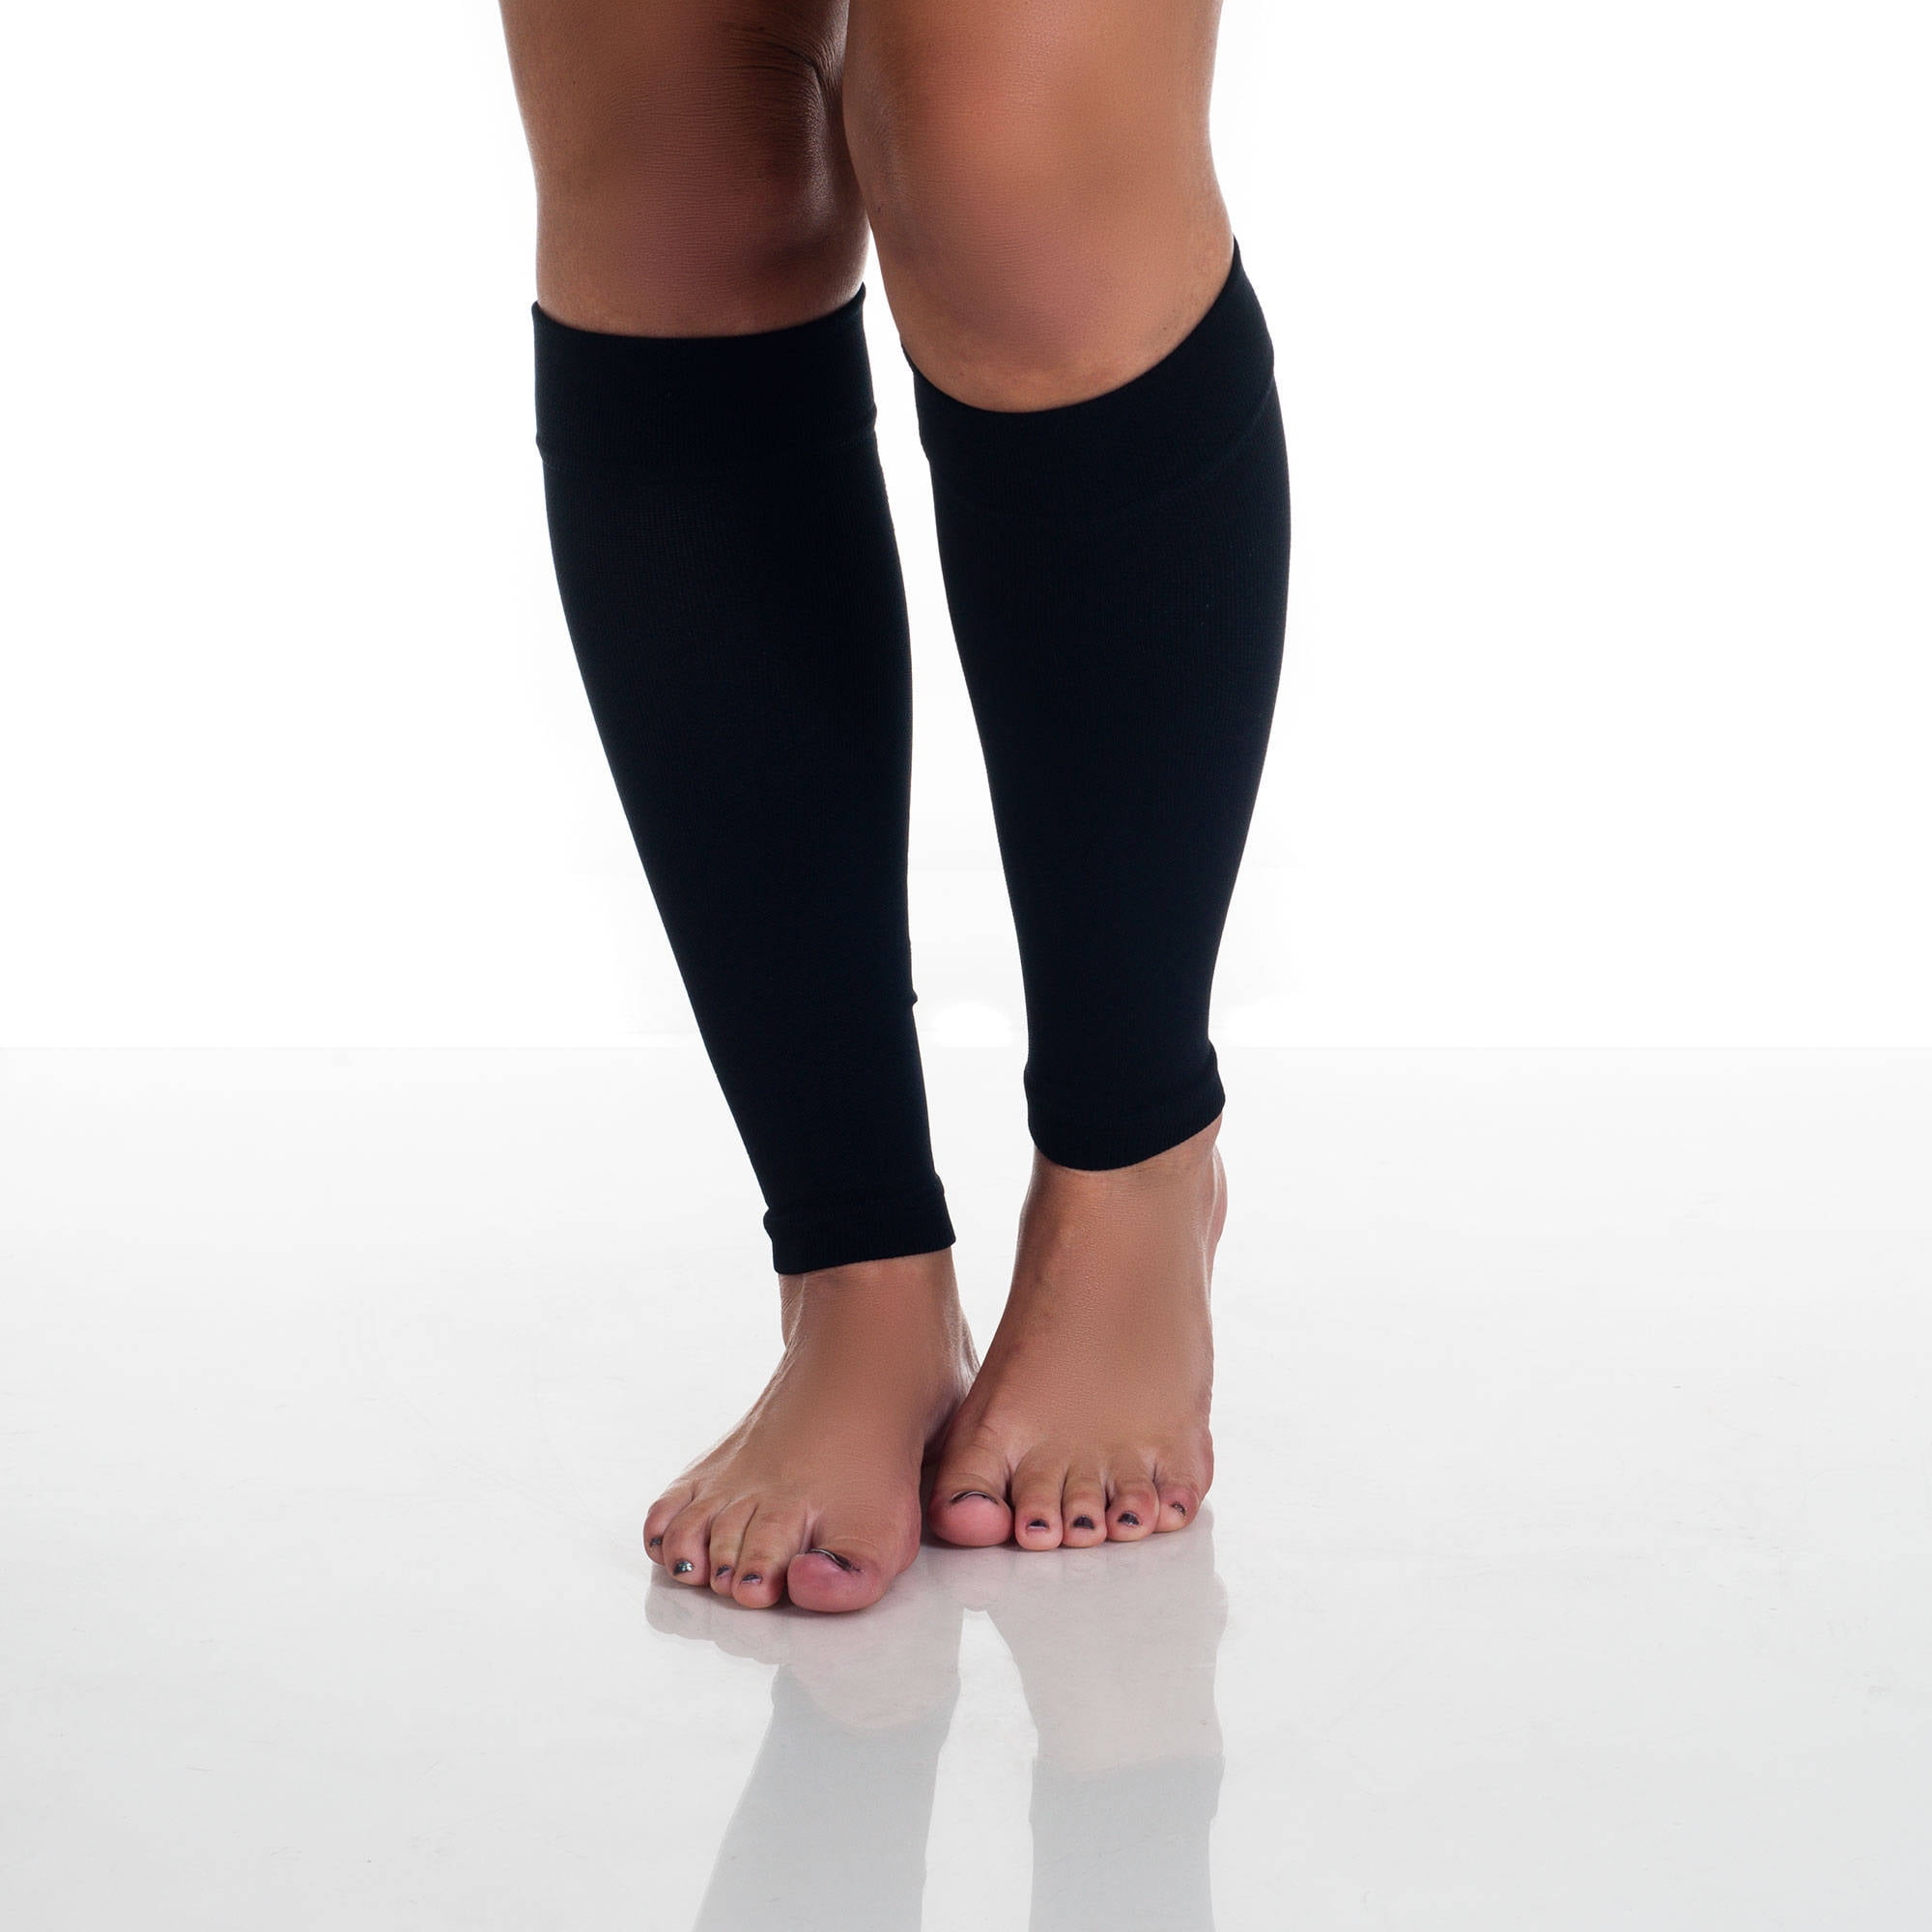 Second Skin Over-the-Calf Performance Compression Socks Black Small 